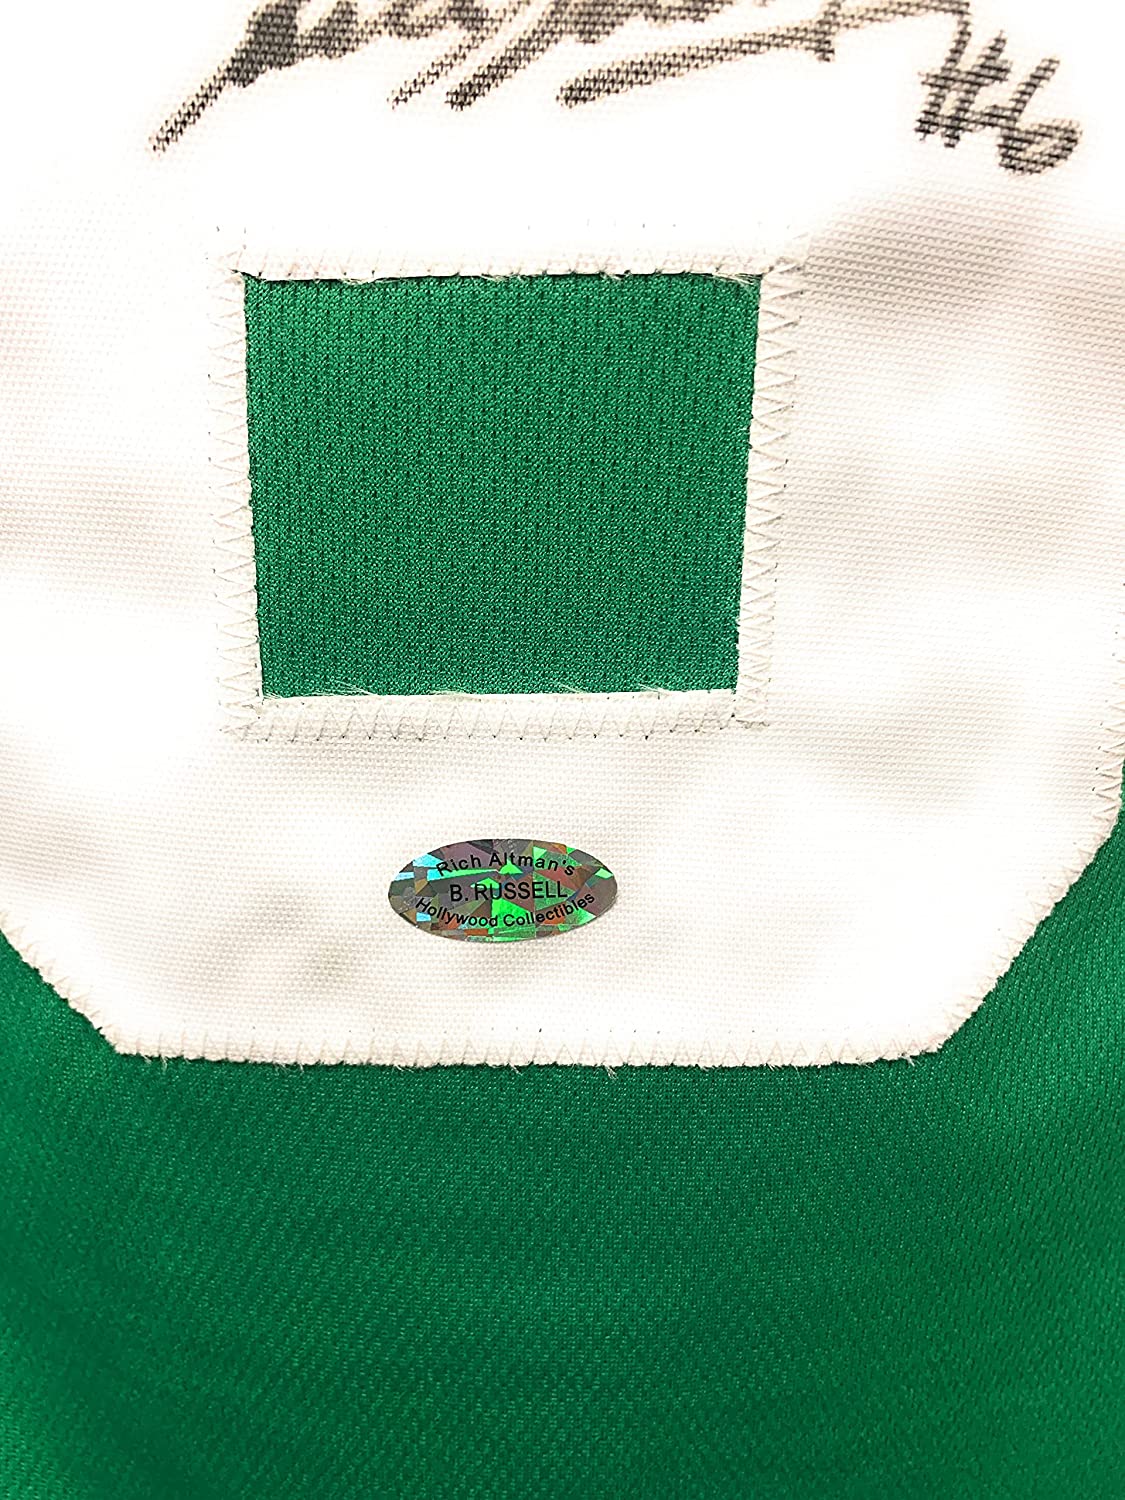 Autographed/Signed Bill Russell Boston Green Basketball Jersey